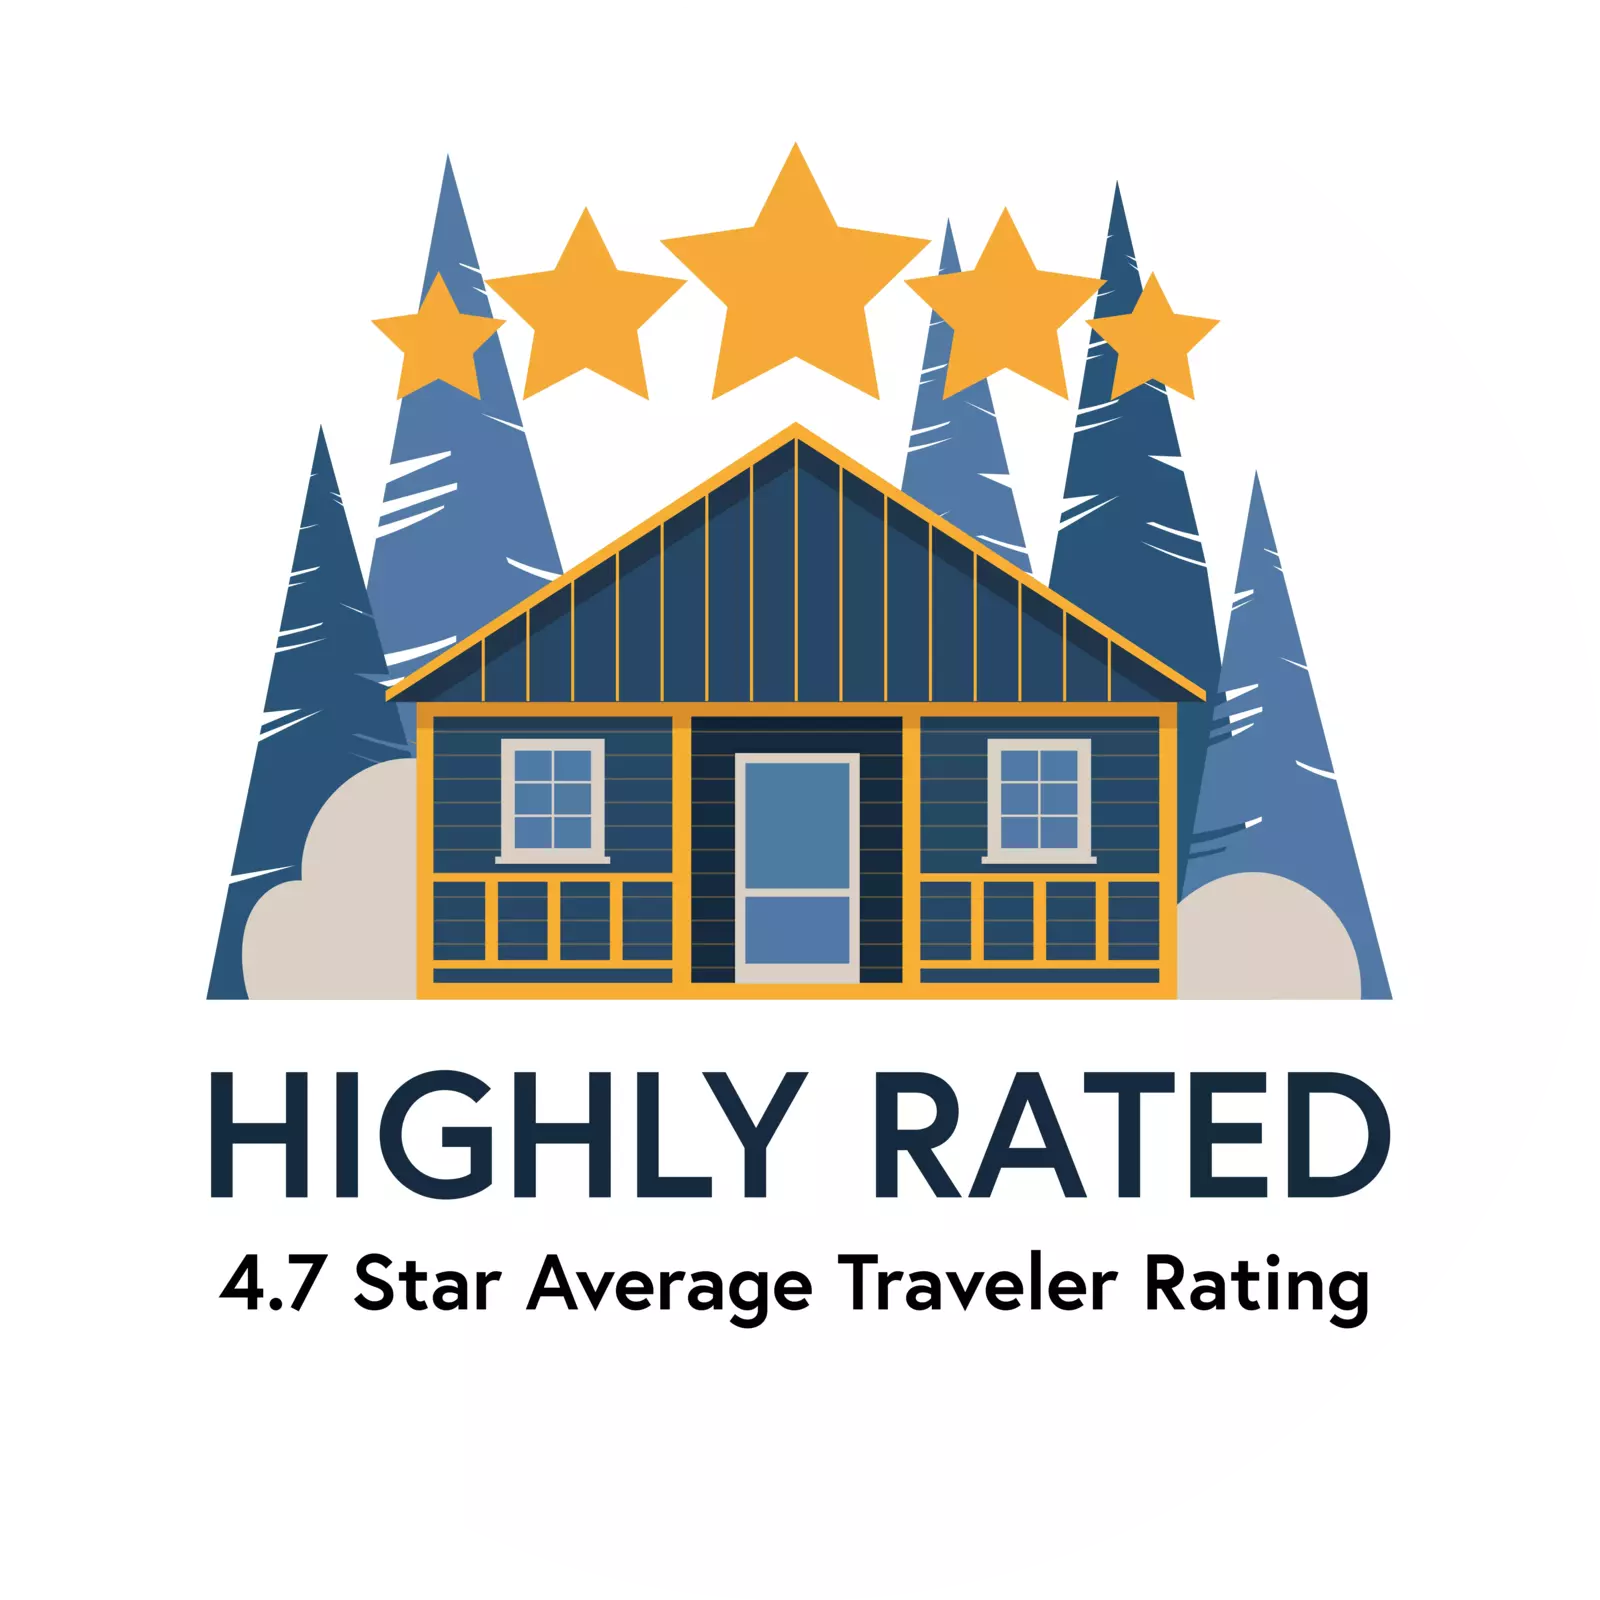 Highly Rated 4.7 Star Average Traveler Rating